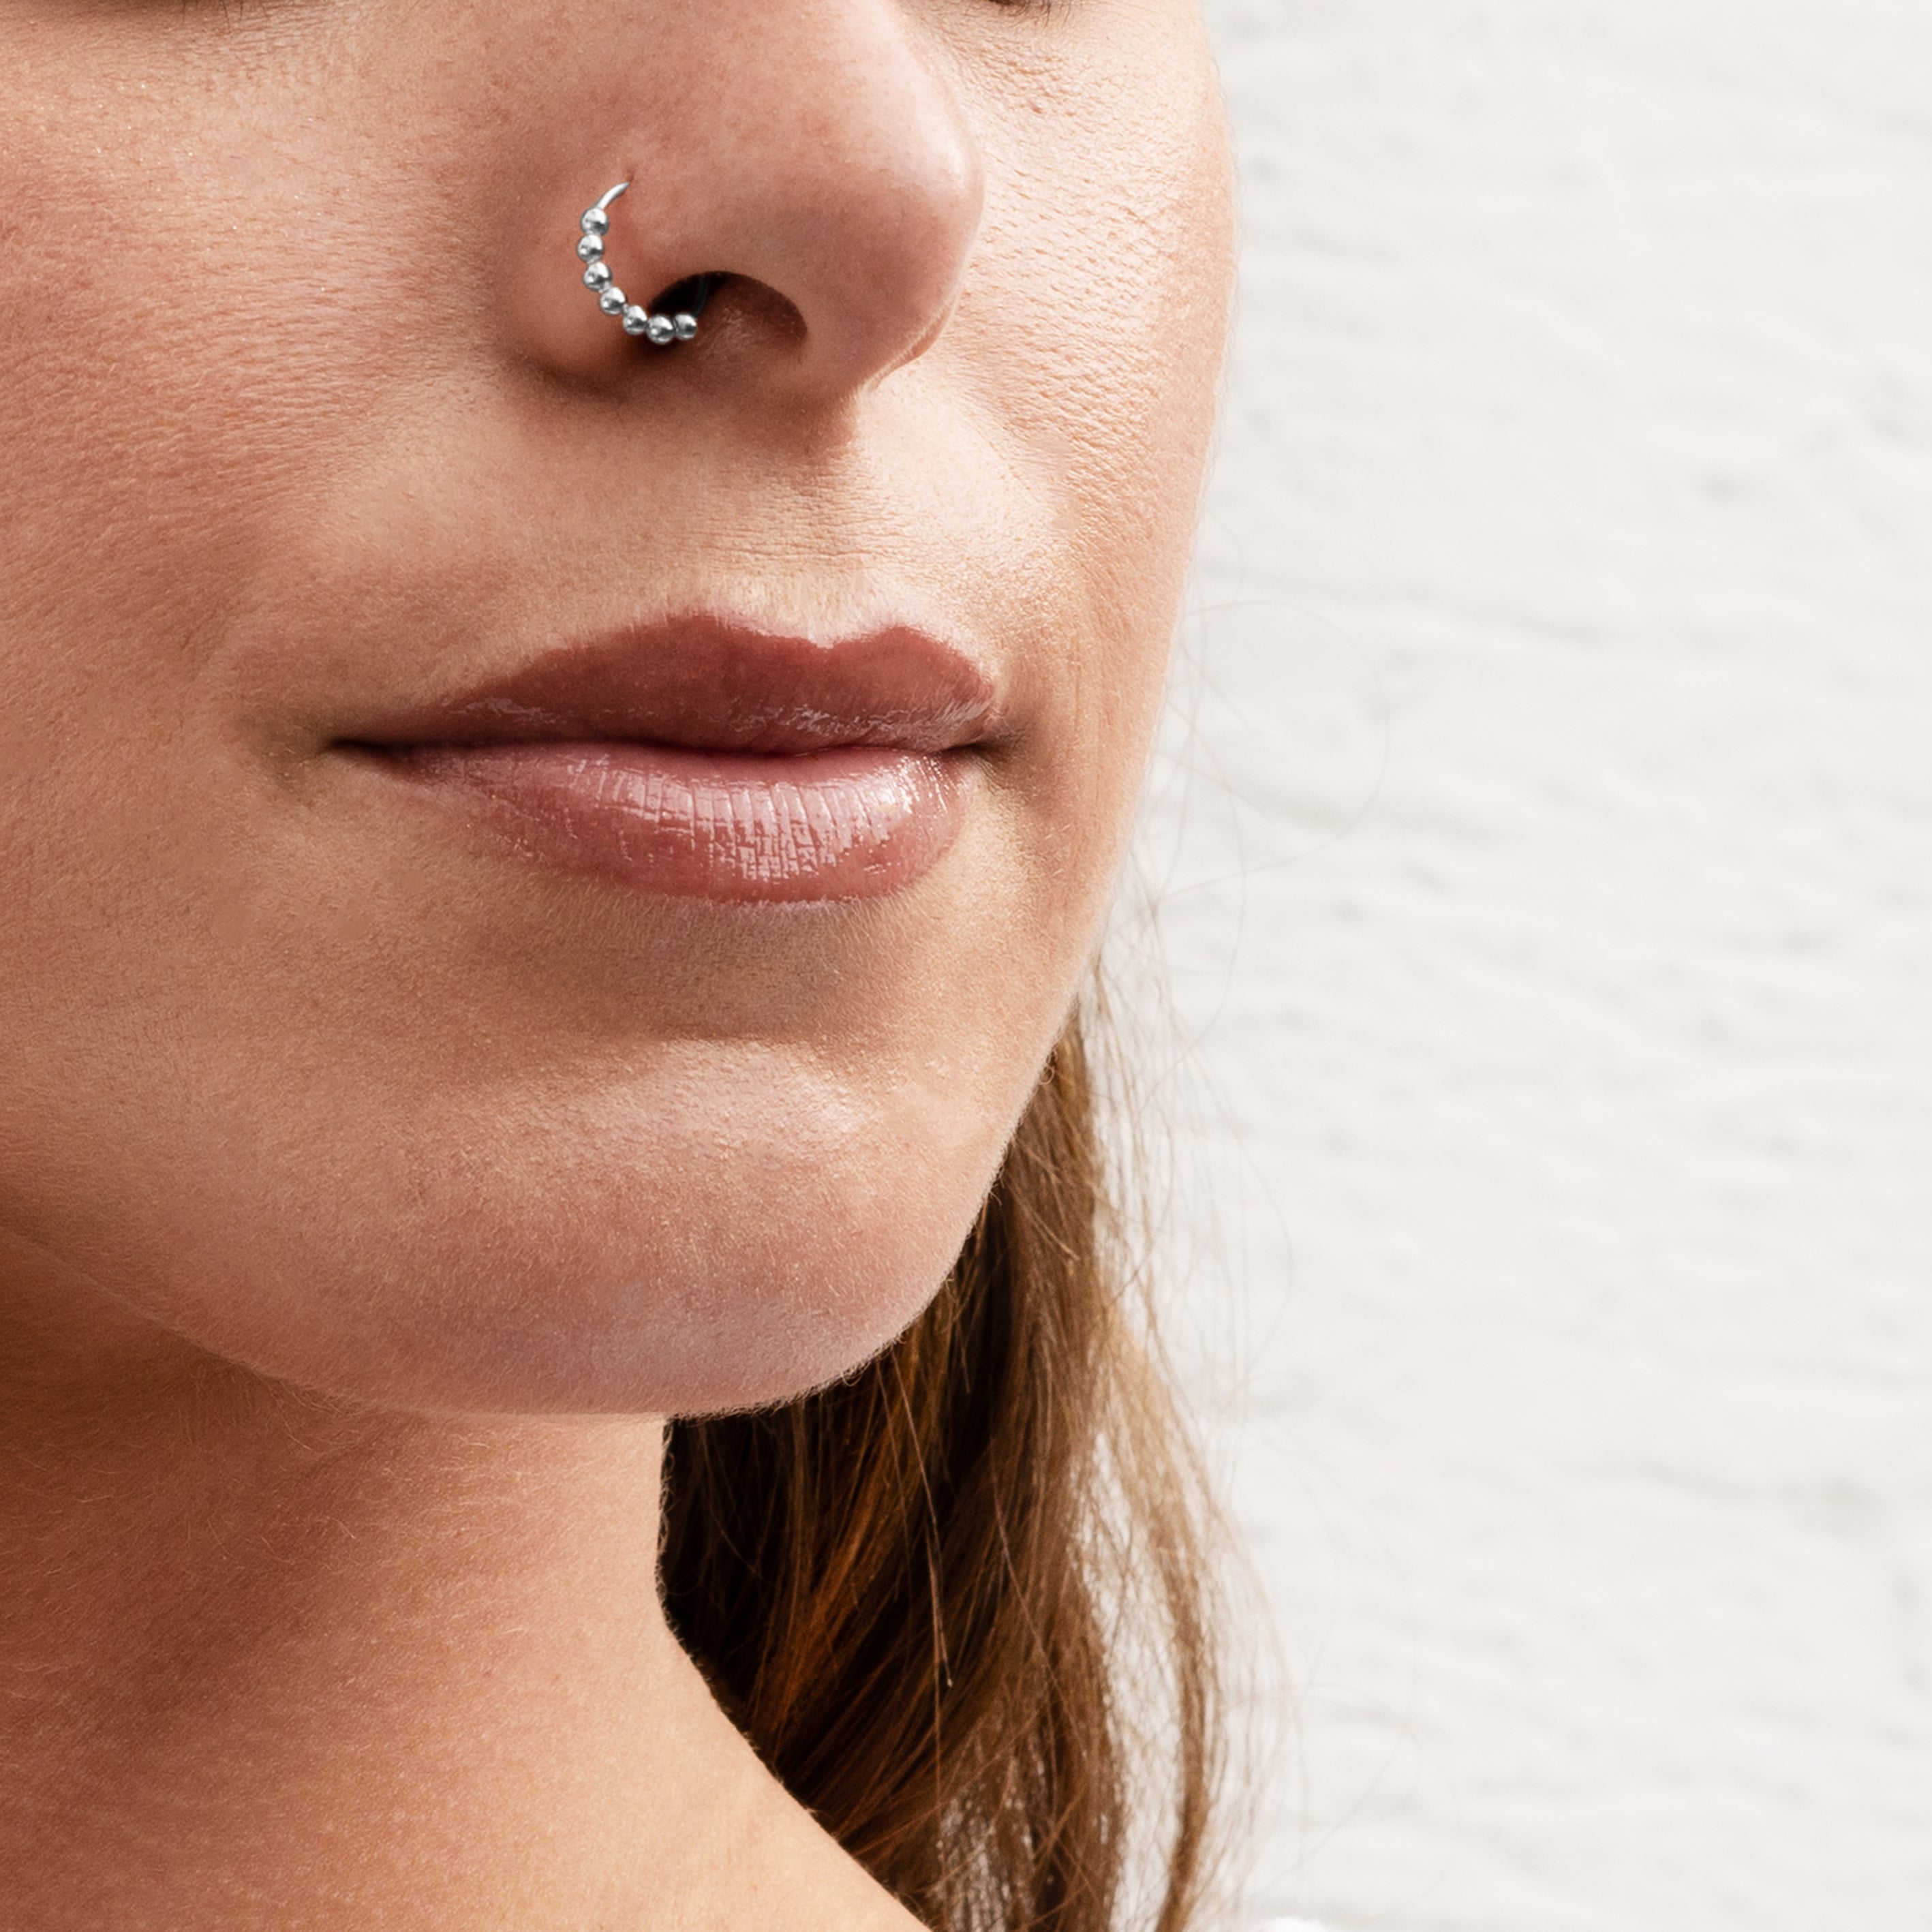 Buy 4Pc Wire Nose Ring, Small Hoop Nose Ring, Also Good for Septum, Tragus,  Helix, Twisted Rope Hoop,Unique nose ring, Delicate nose ring, Tribal nose  ring, Pack of 4 Ring at Amazon.in